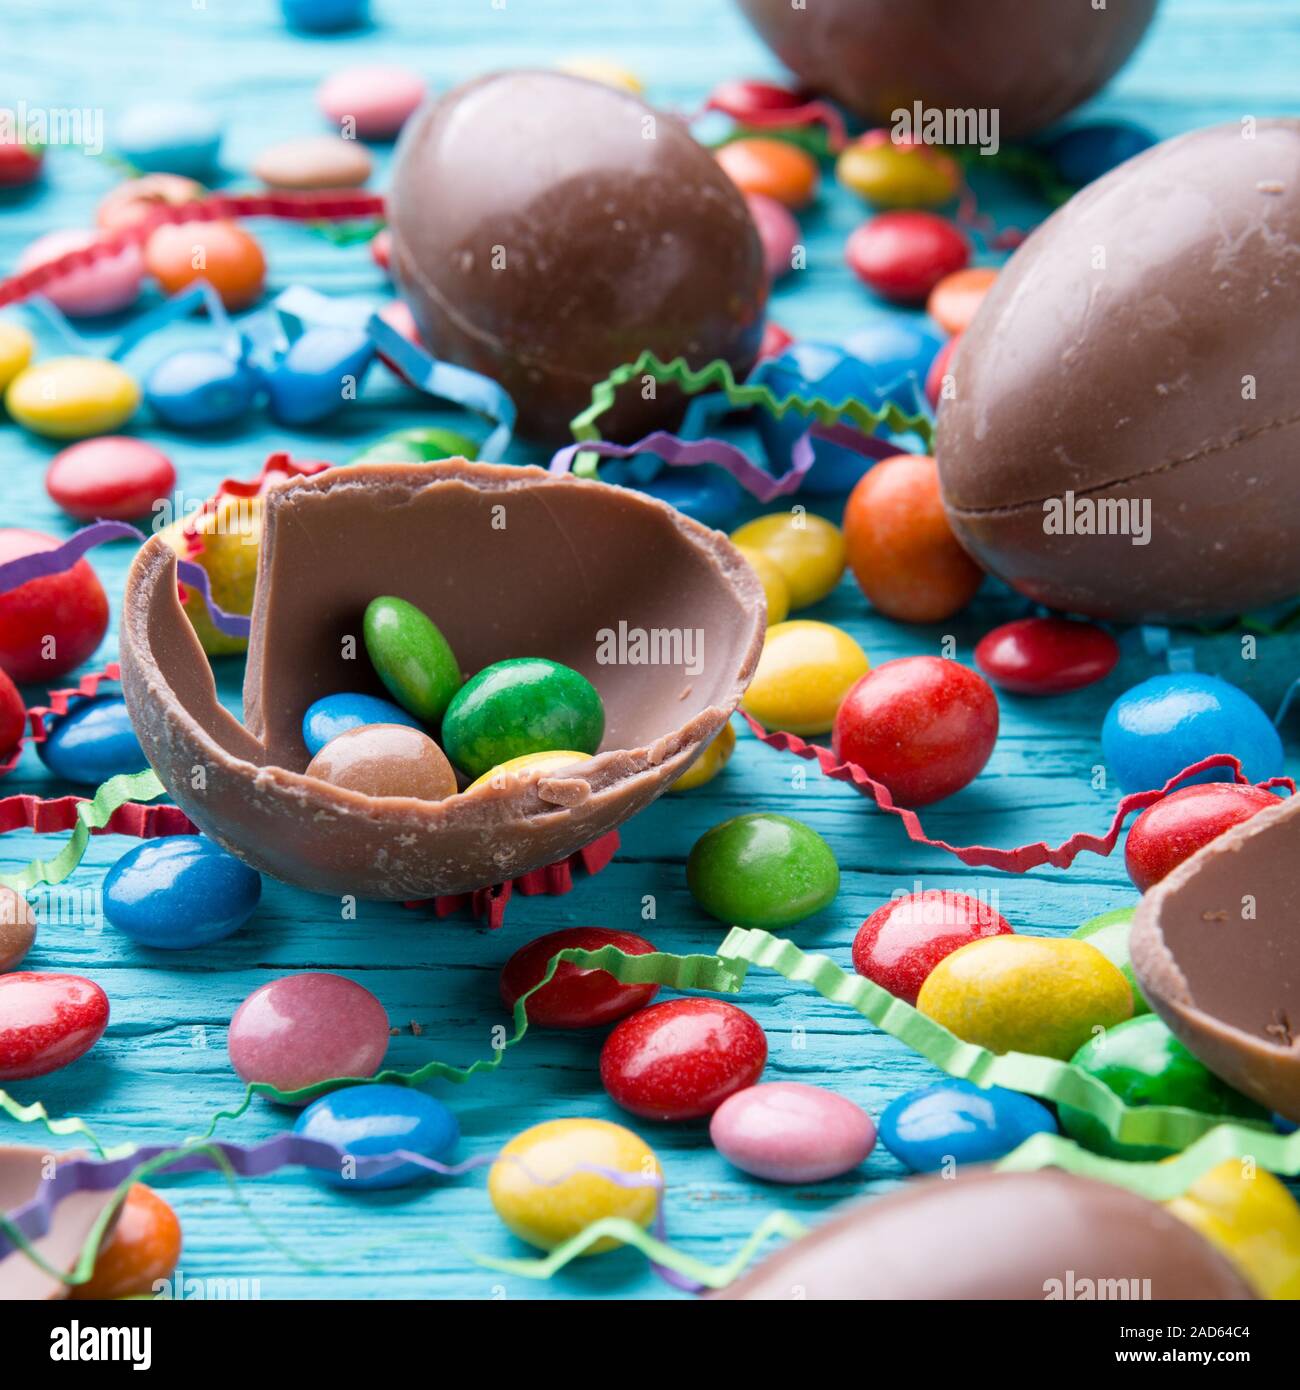 Image of colorful sweets, eggs Stock Photo